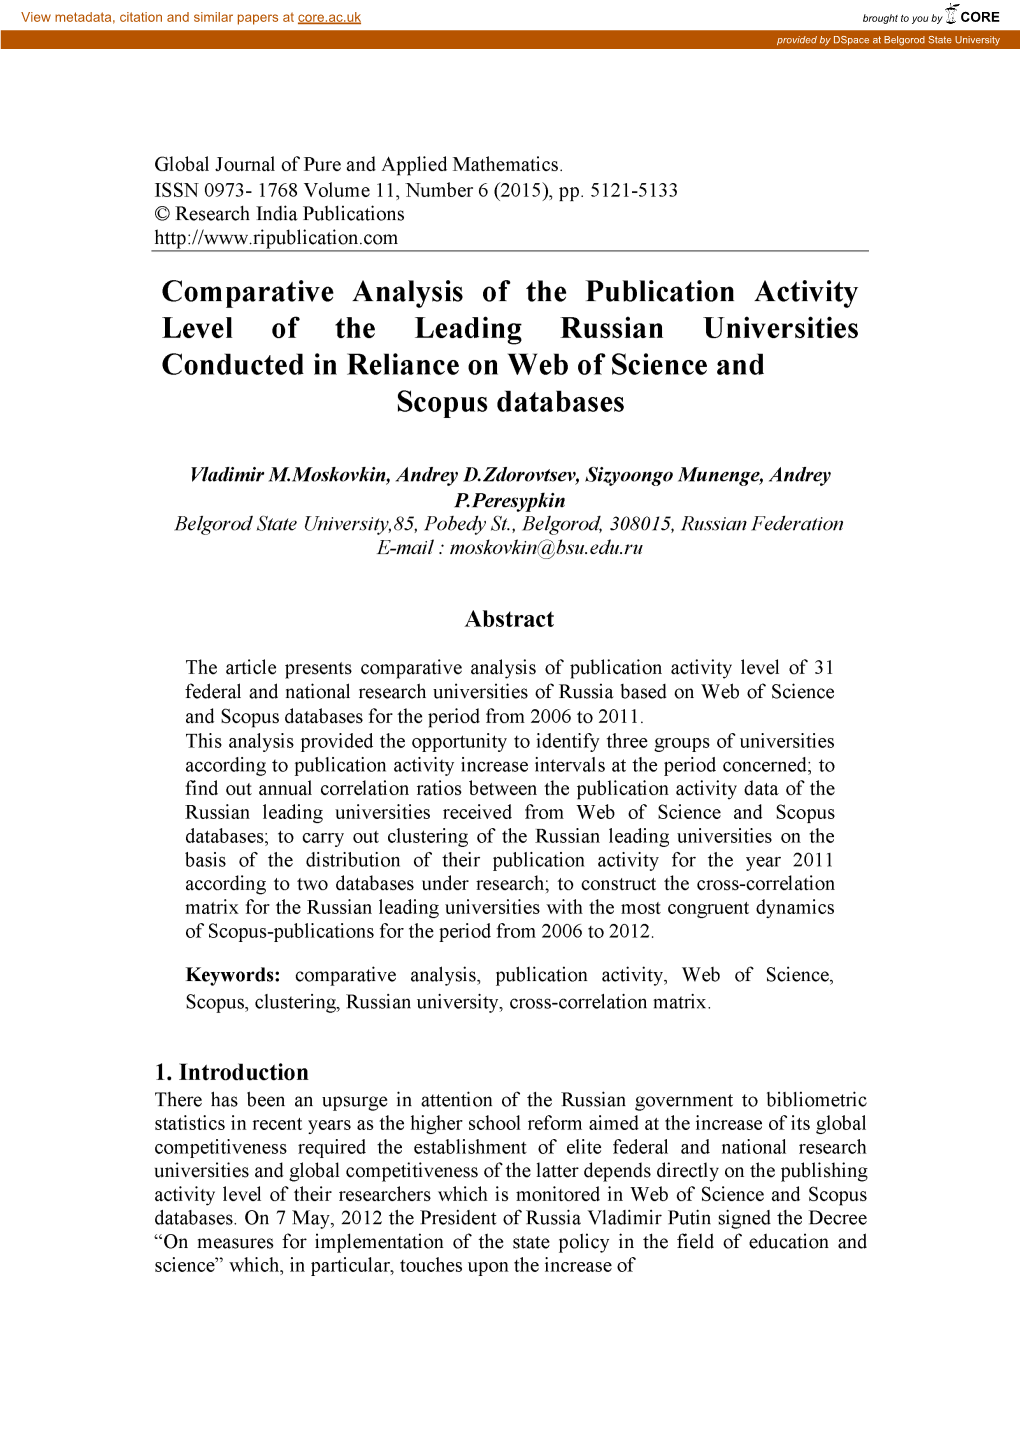 Comparative Analysis of the Publication Activity Level of the Leading Russian Universities Conducted in Reliance on Web of Science and Scopus Databases